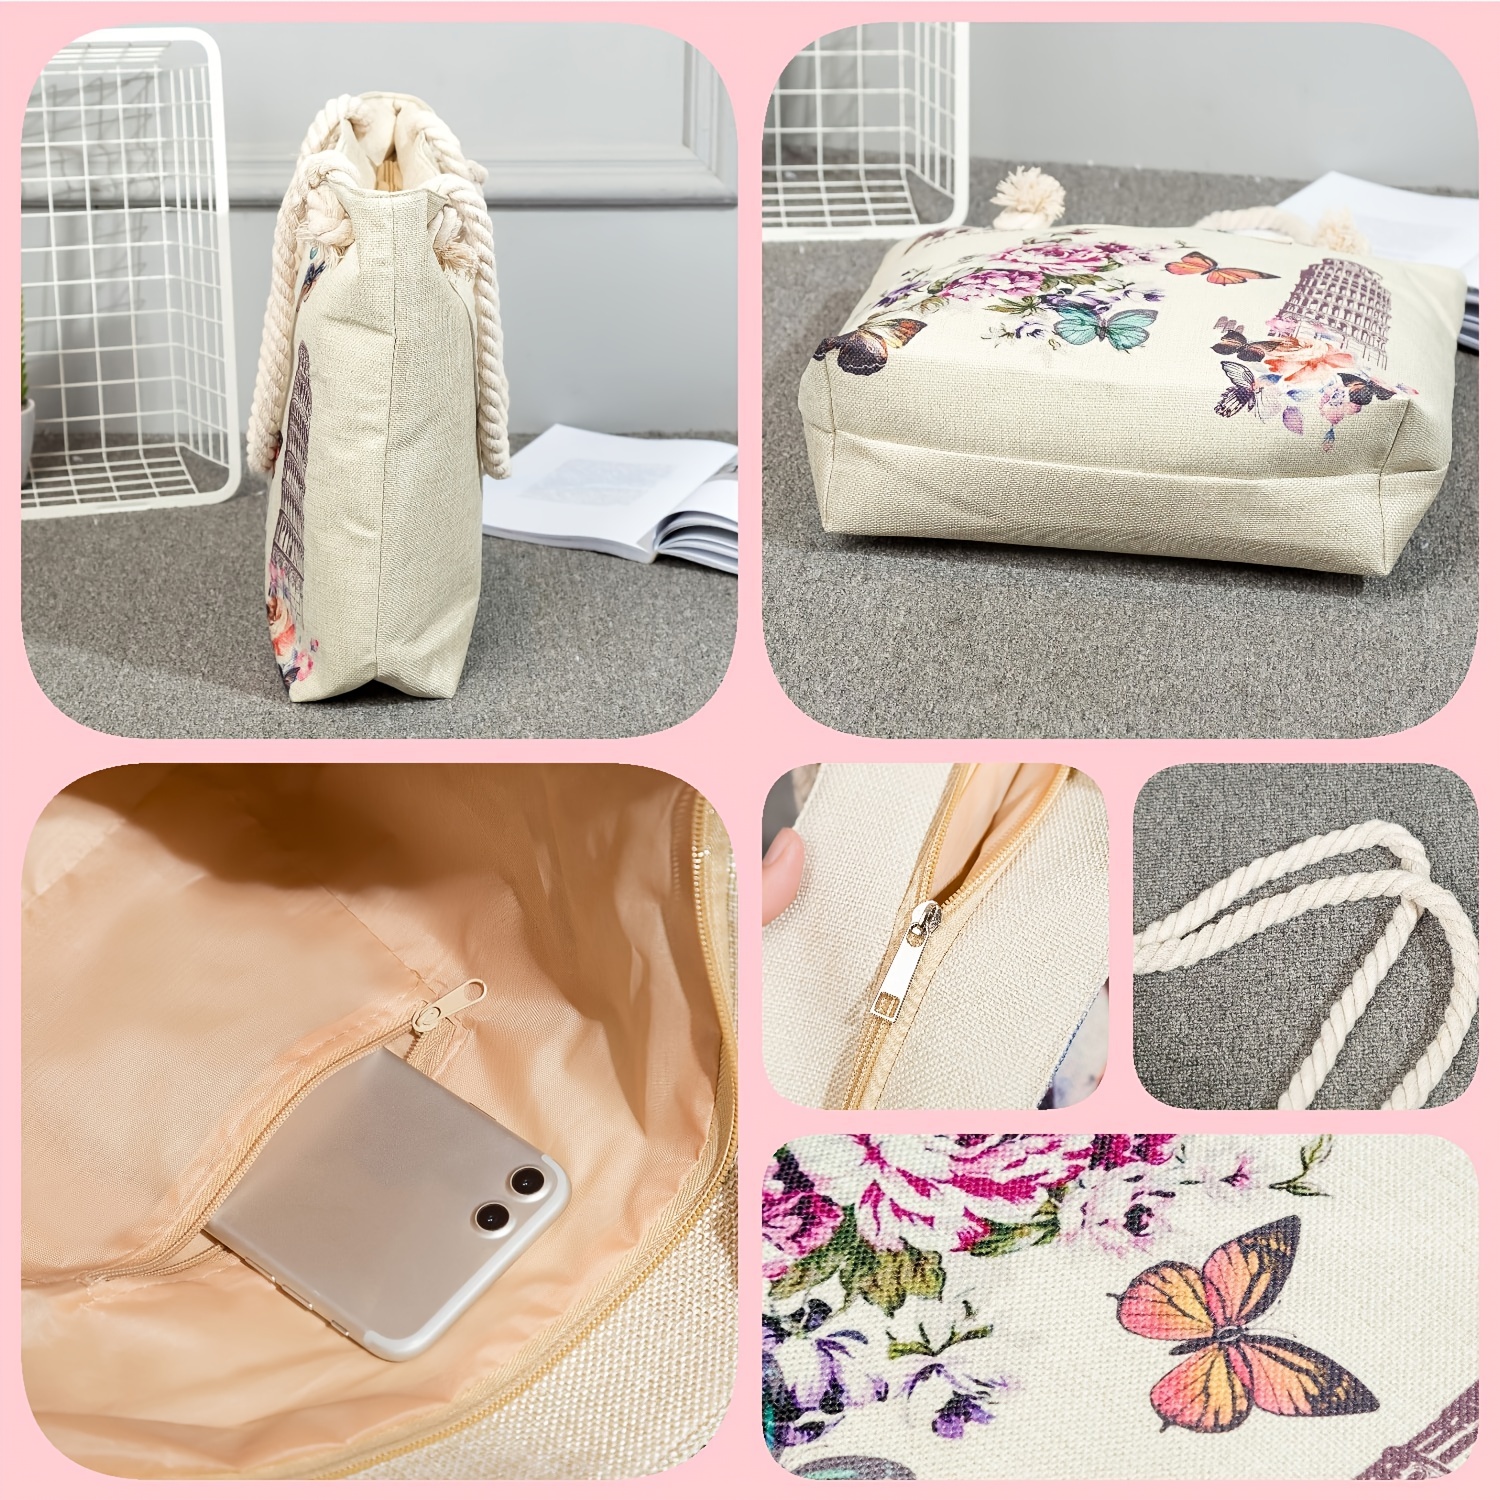 www. - Miyahouse Women Canvas Backpacks For Teenage